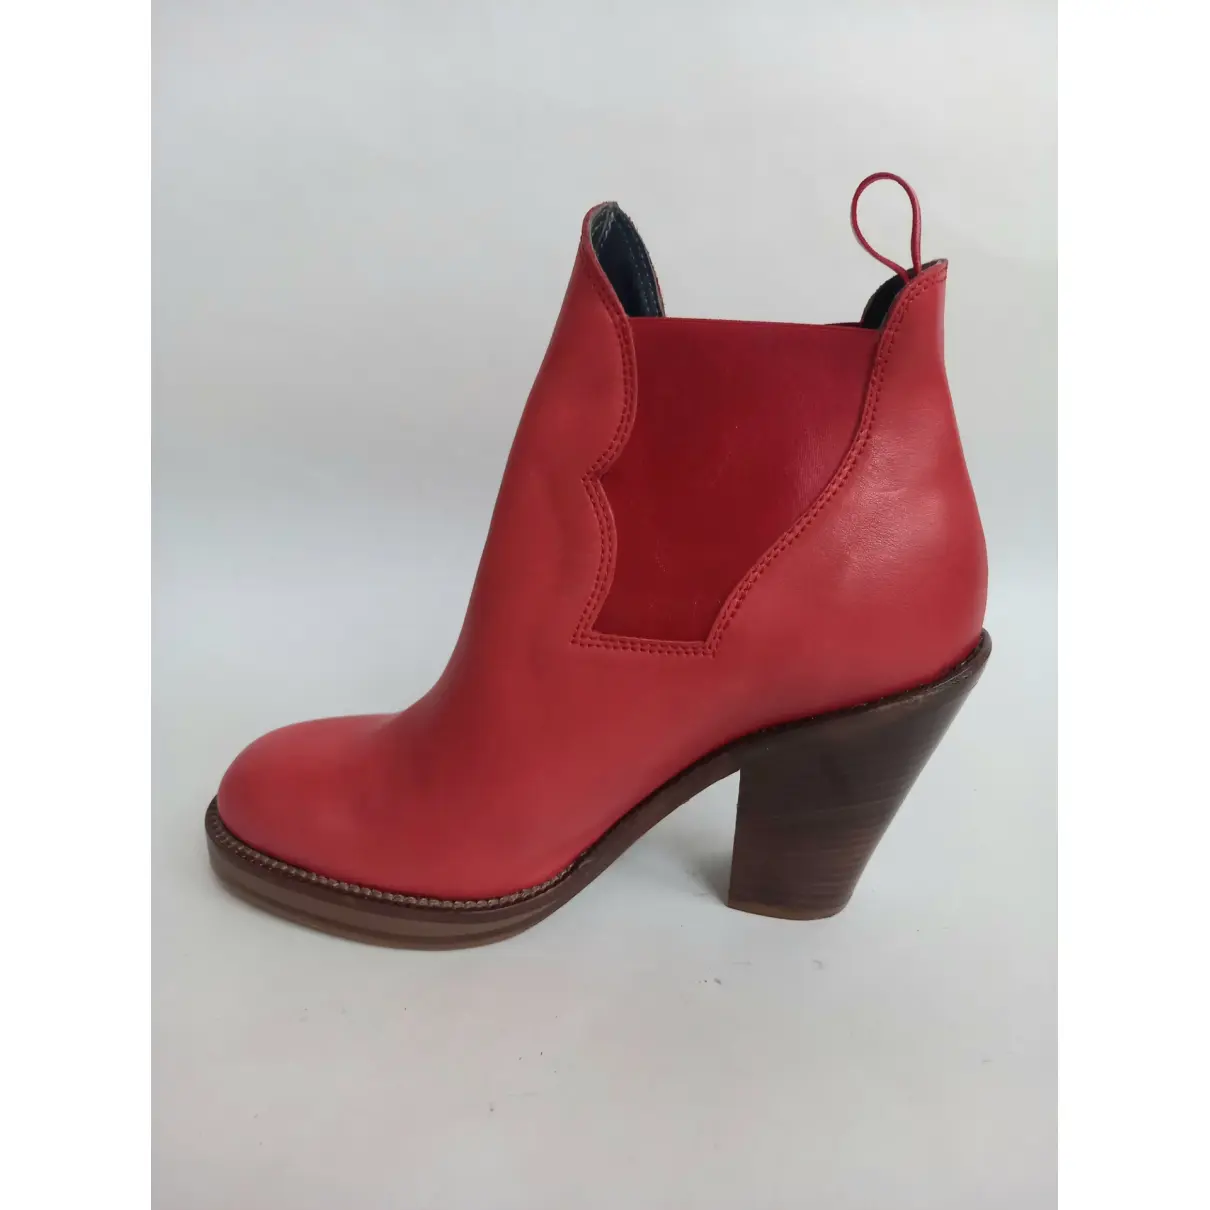 Buy Acne Studios Star leather ankle boots online